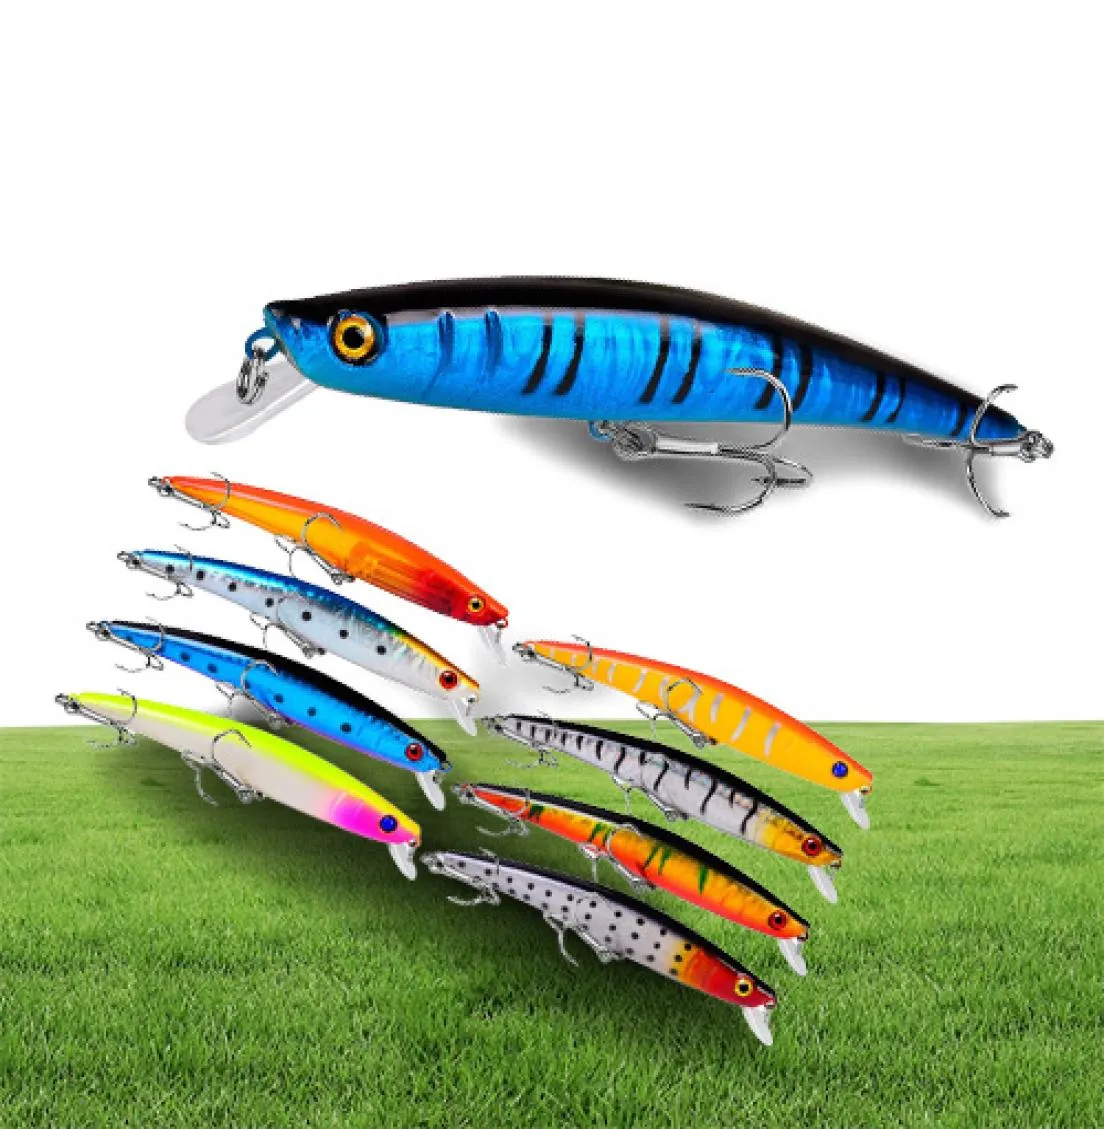 115mm 102G Minnow Hook Hard Baits Lures 4 Treble Hooks 10 Färger Mixed Plastic Fishing Gear 10 Pieces Lot WHB293186215